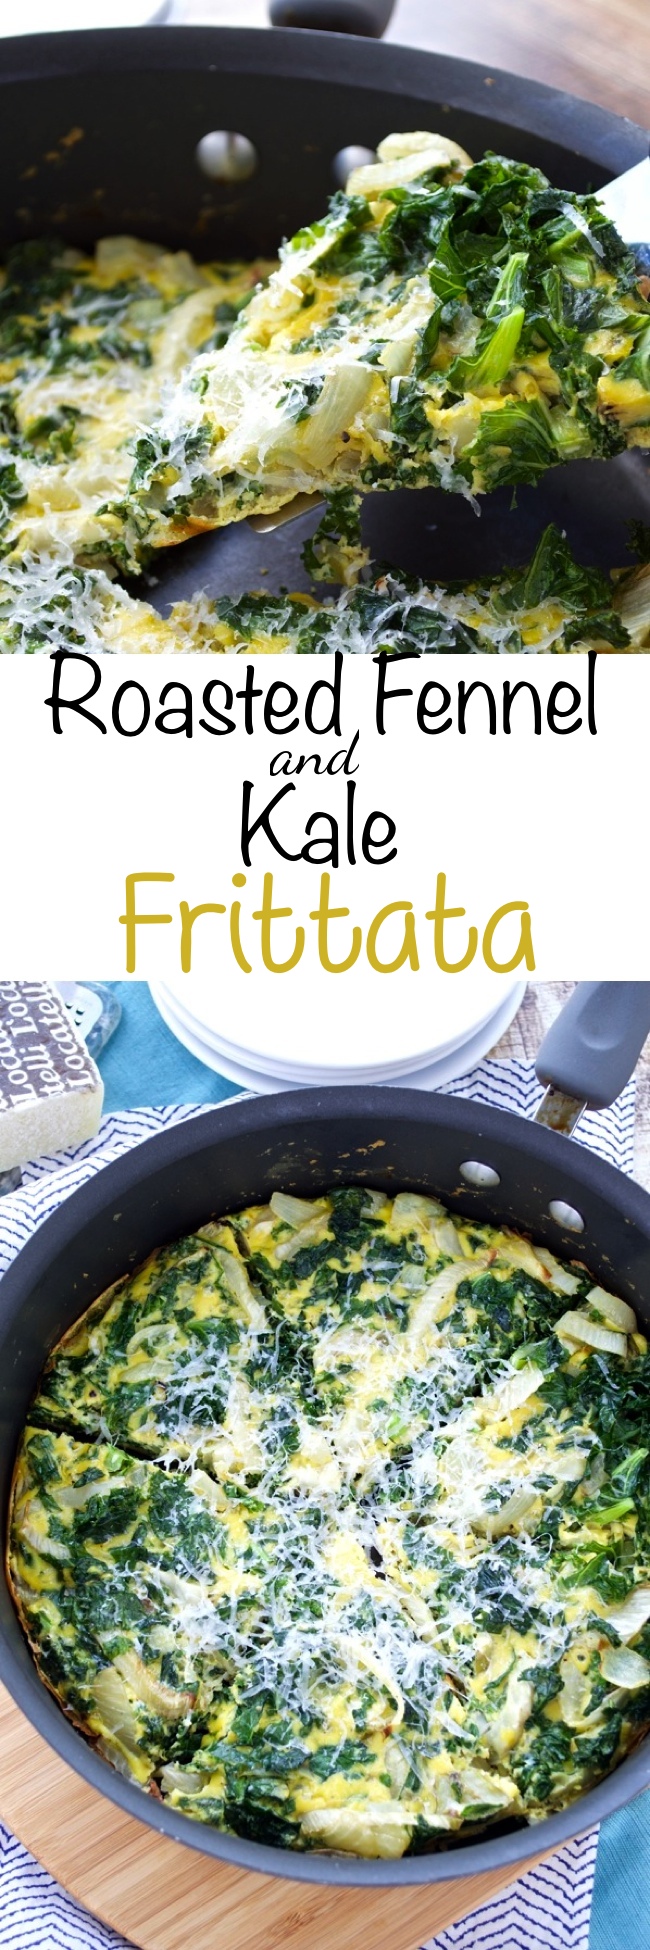 Roasted Fennel and Kale Frittata Pin